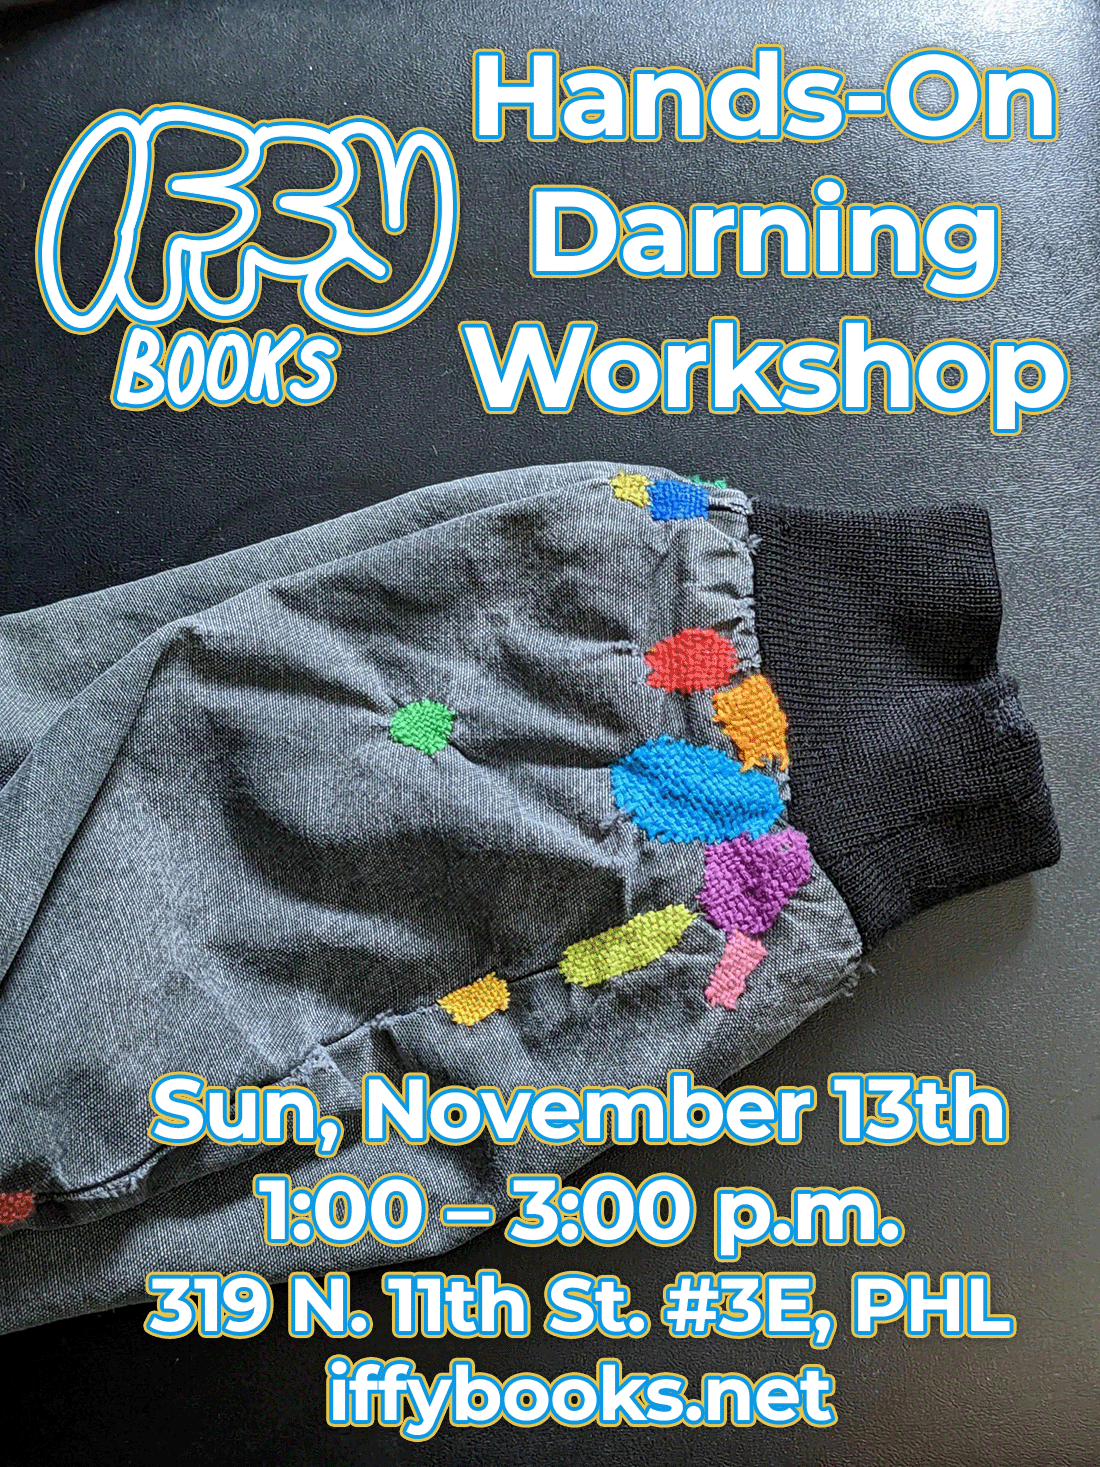 Flyer with a photo of a jacket sleeve, with about a dozen darned repairs done with colorful thread. The text reads as follows: Iffy Books Hands-On Darning Workshop Sun, November 13th 1:00 – 3:00 p.m. 319 N. 11th St. #3E, PHL iffybooks.net